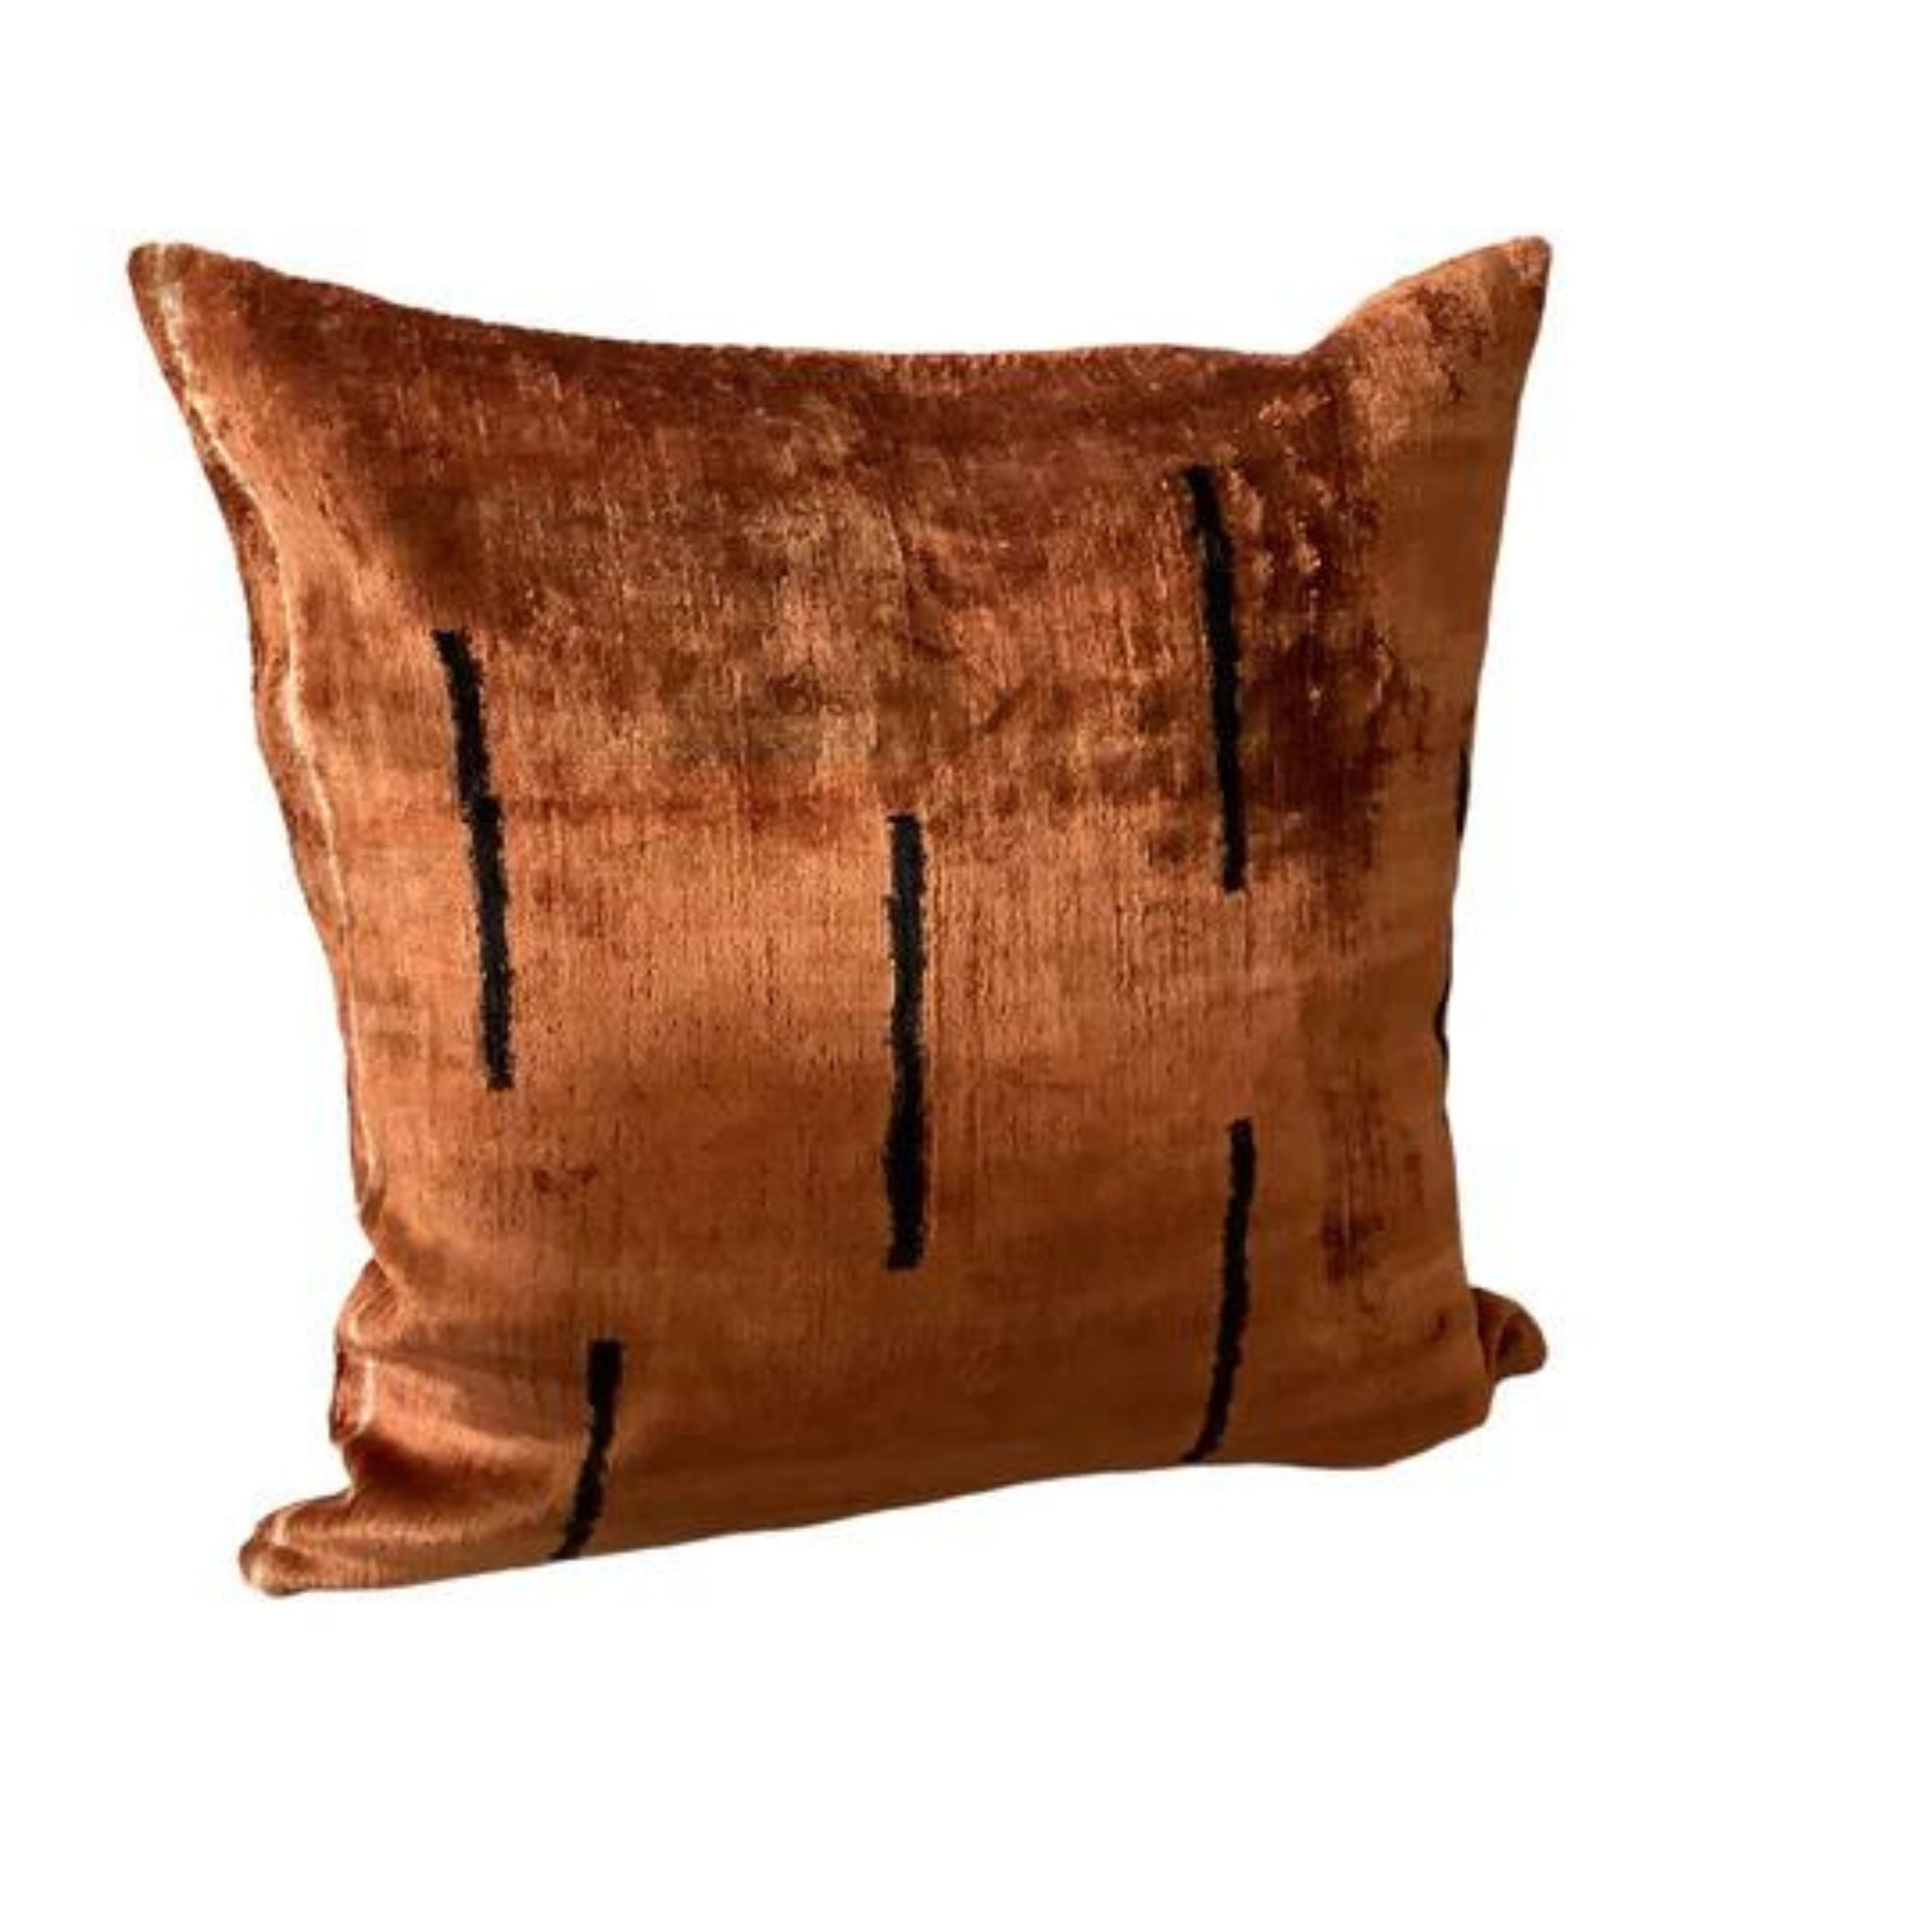 GAL THROW PILLOW - Simply Elevated Home Furnishings 